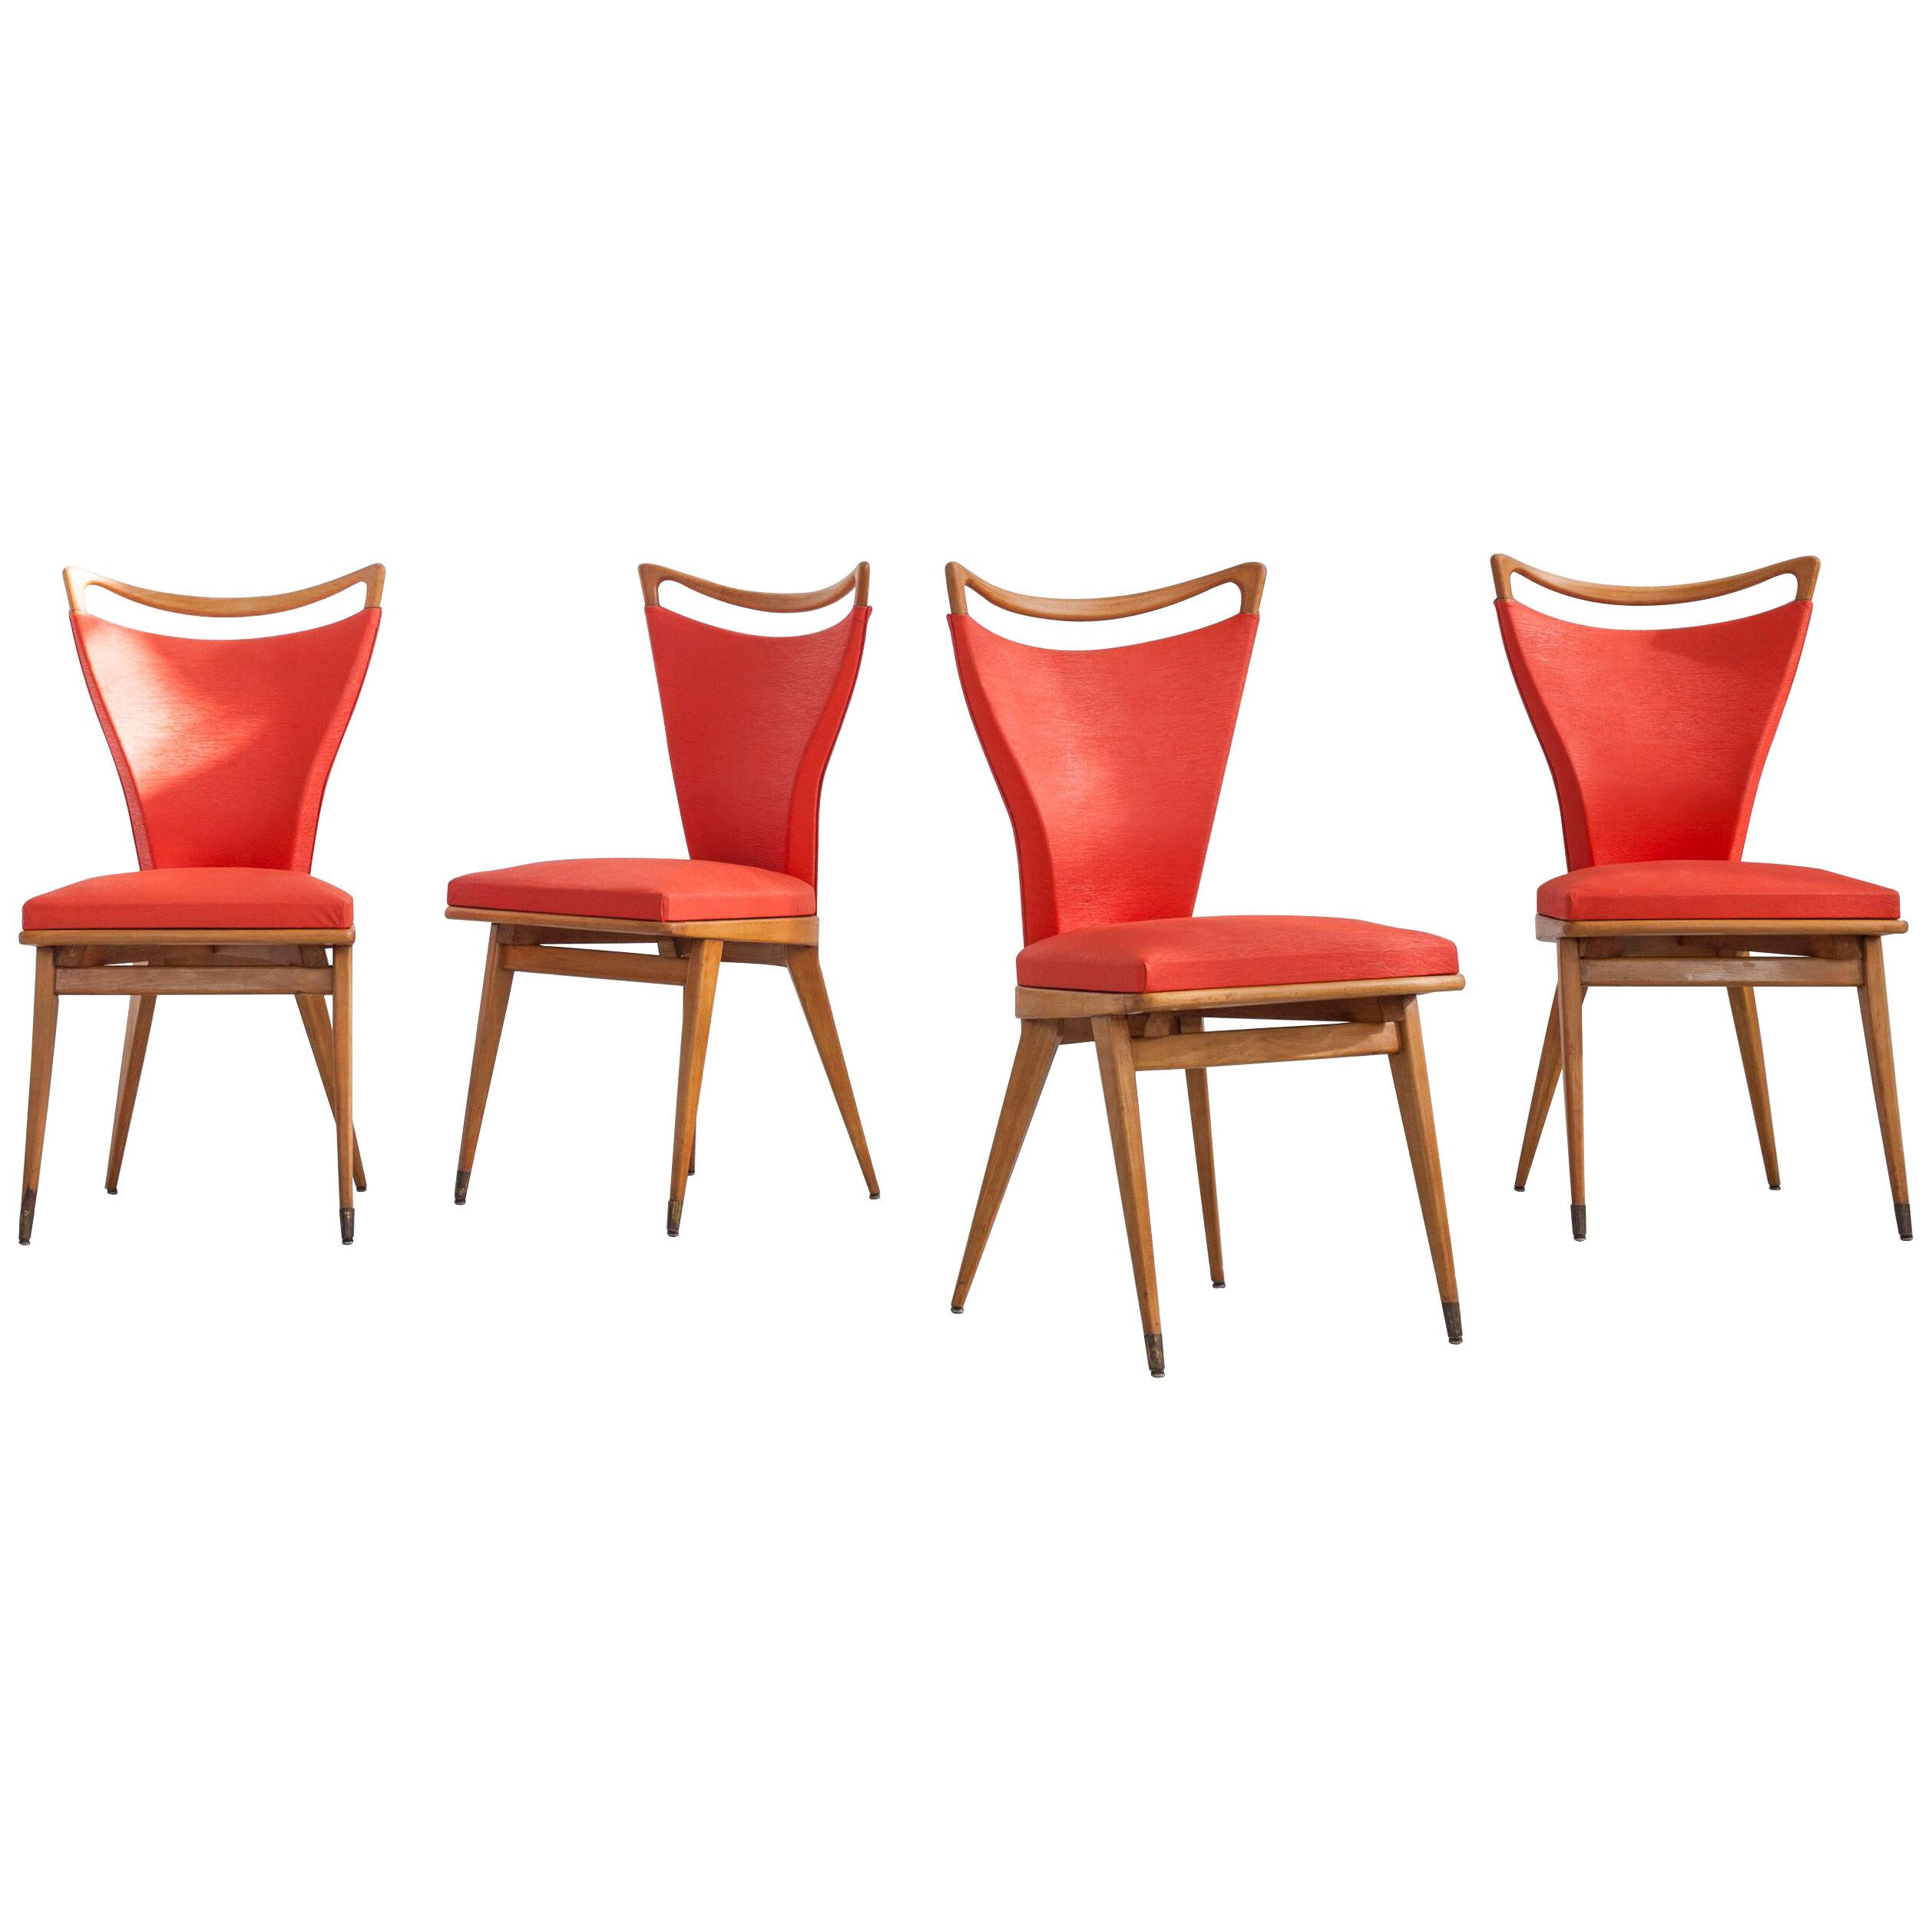 Set of 4 French Wooden Chairs with Red Faux Leather Cover, 1950s